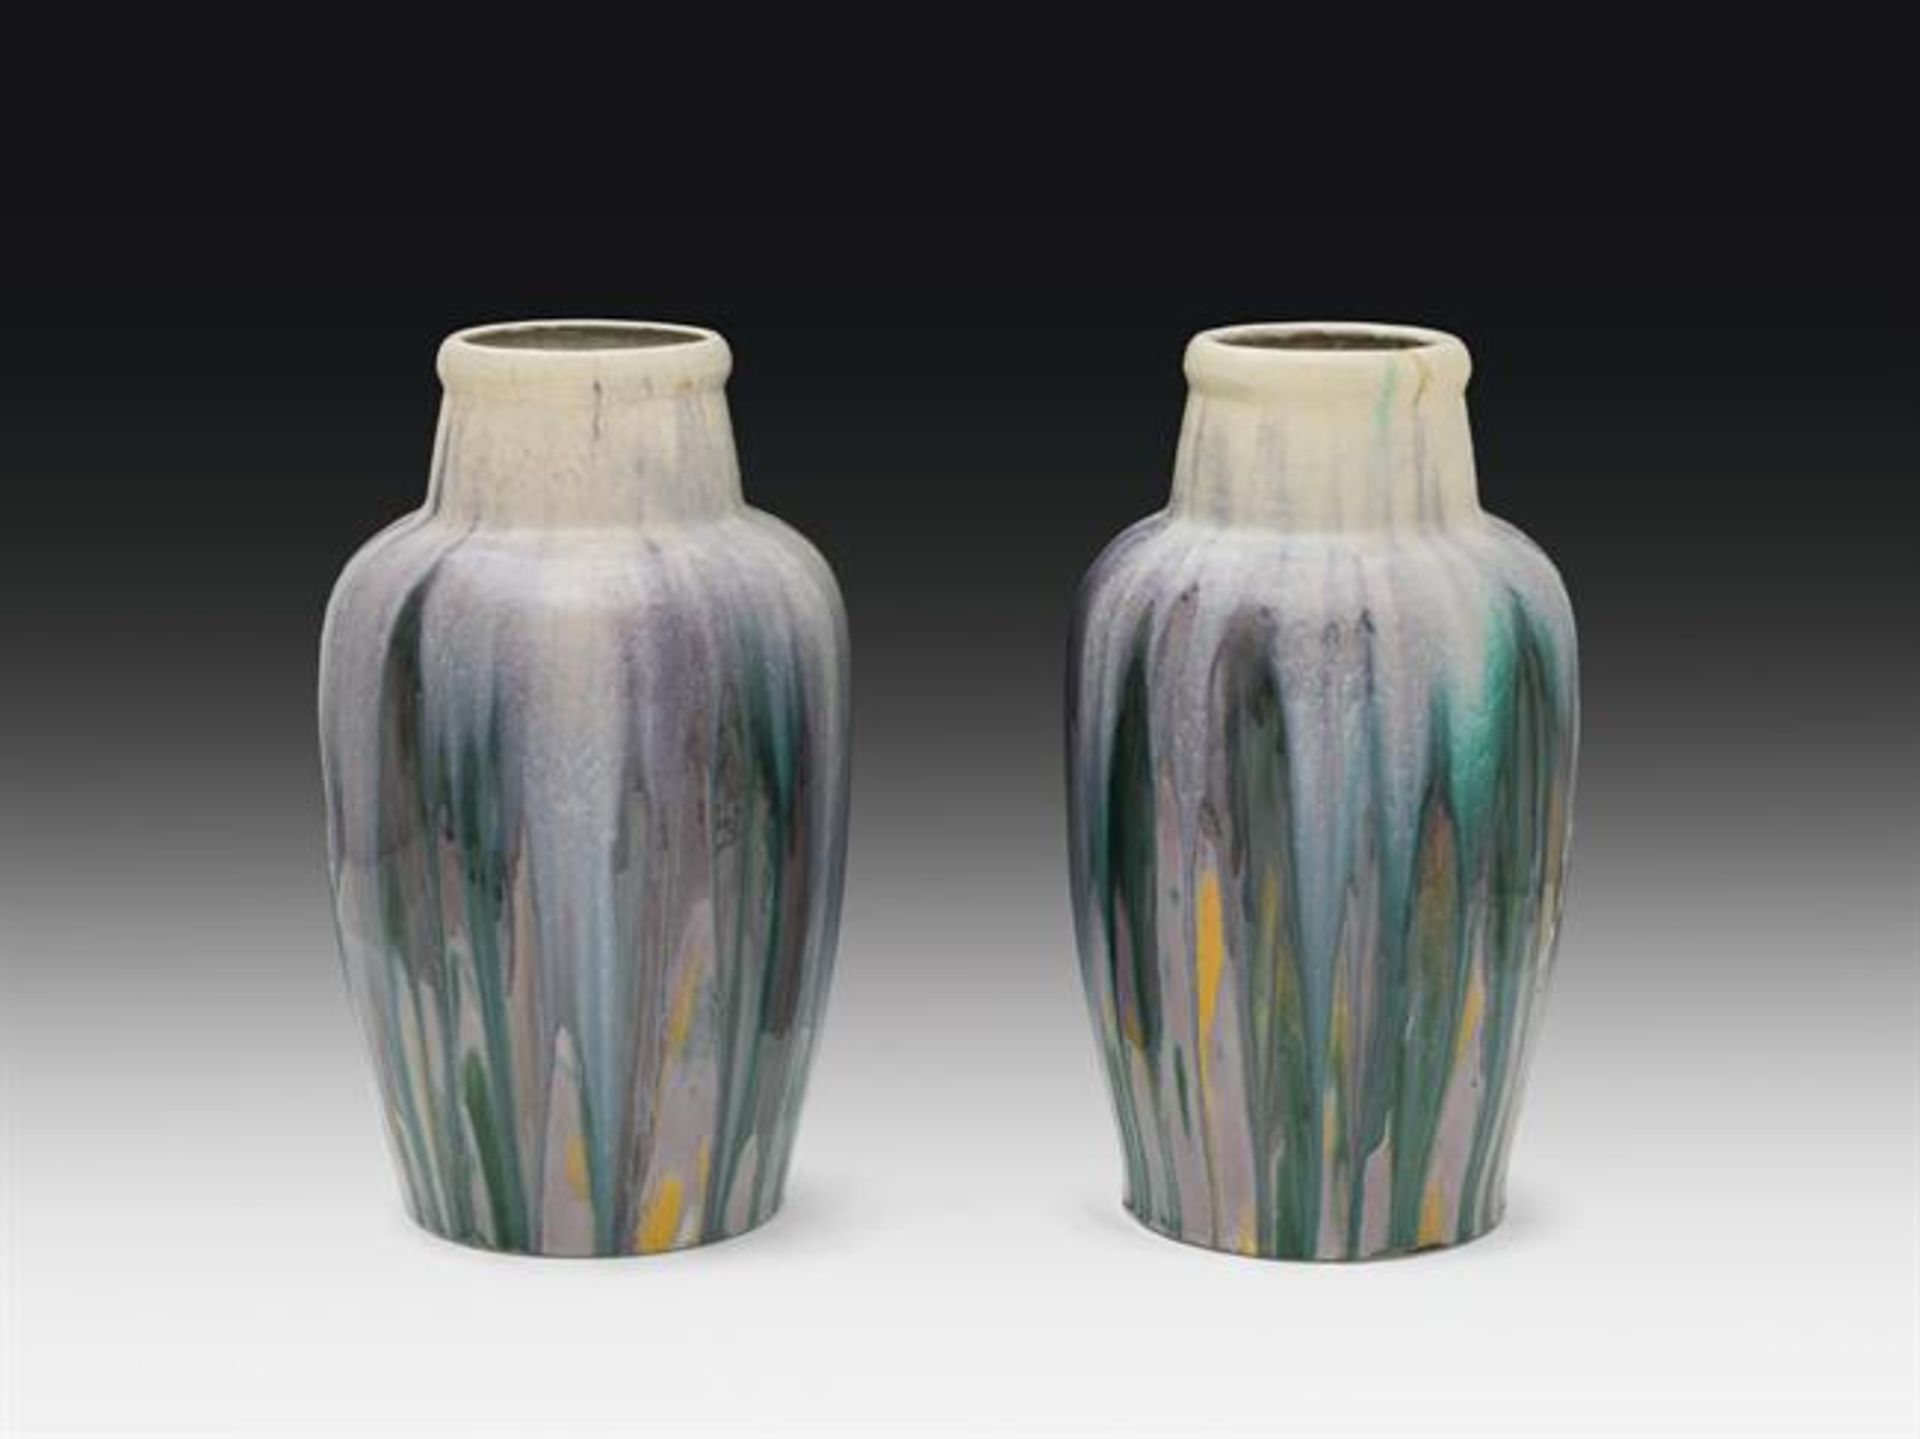 Attributed to Jutta Sika : Pair of large vases